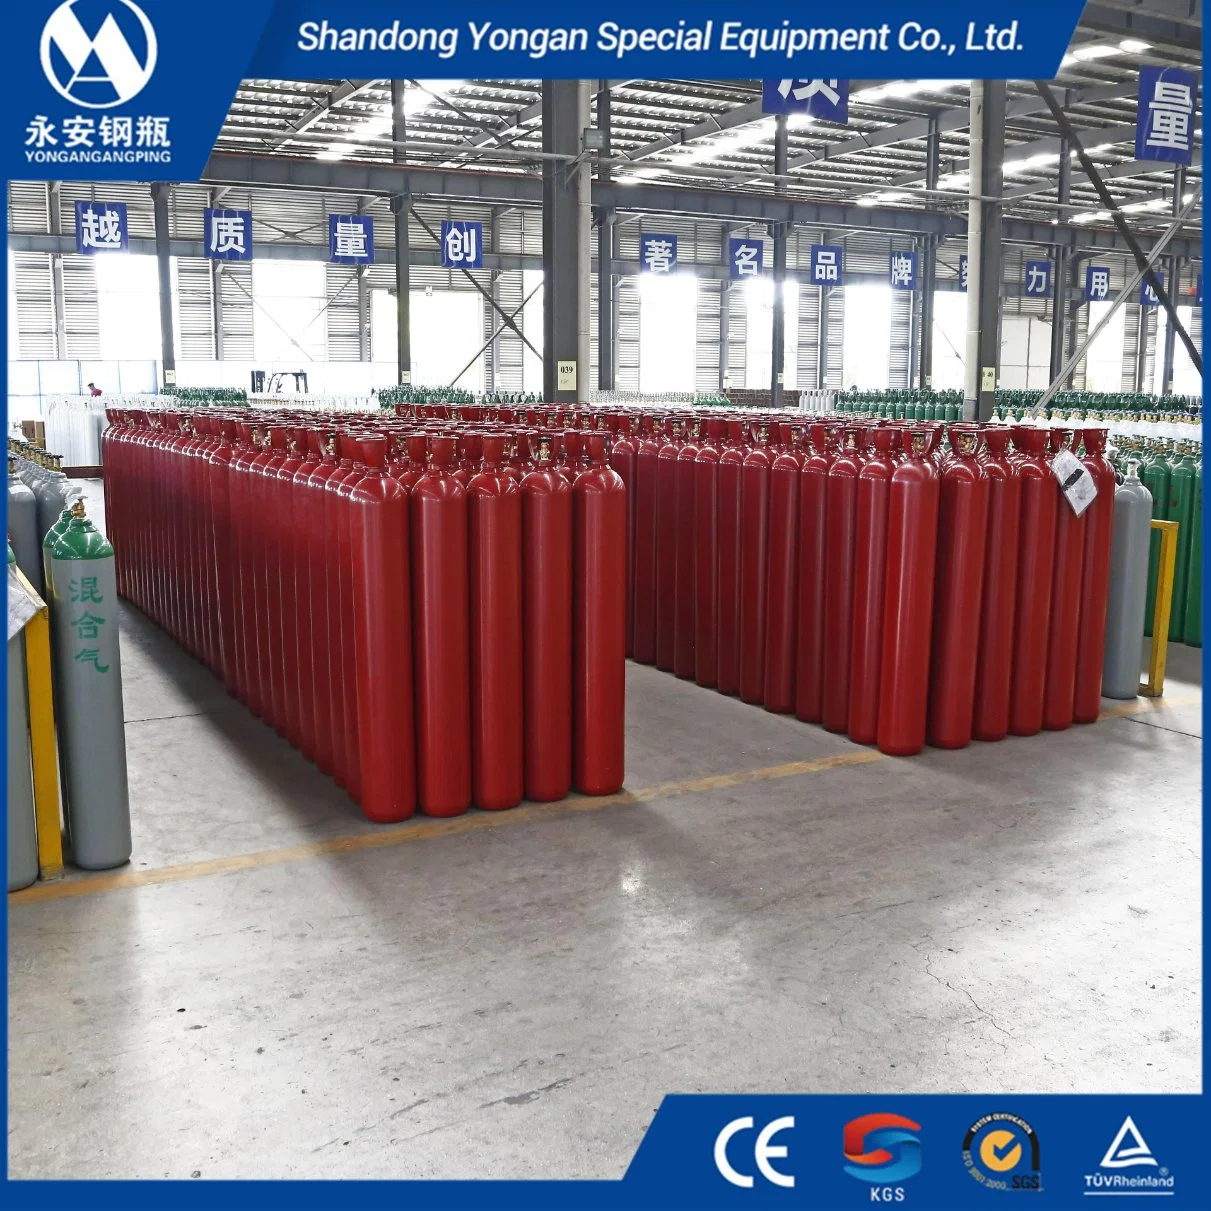 50L 166.7bar 6.2mm Tped ISO 9809 High Pressure Vessel Seamless Steel Gas Cylinder